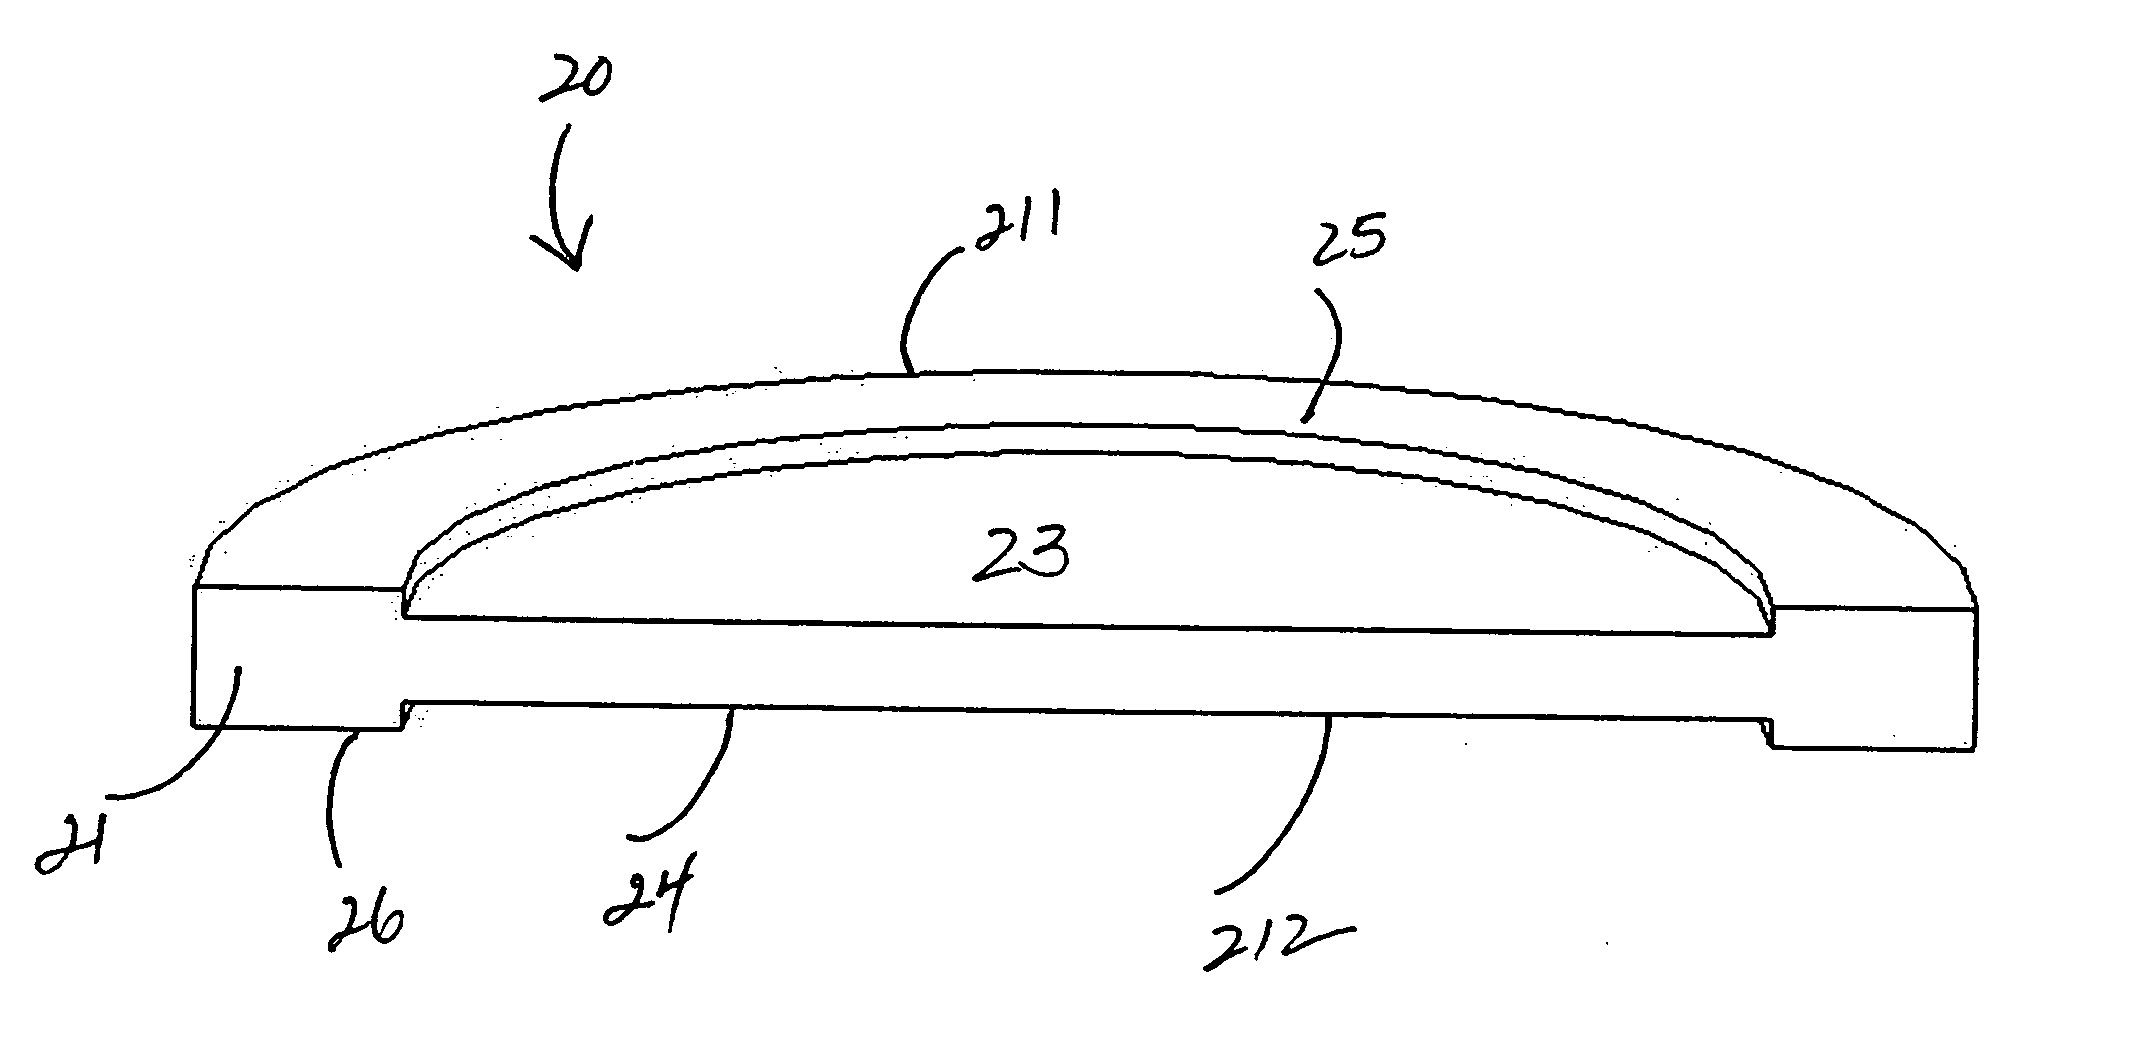 Systems and methods for thermal management of electronic components